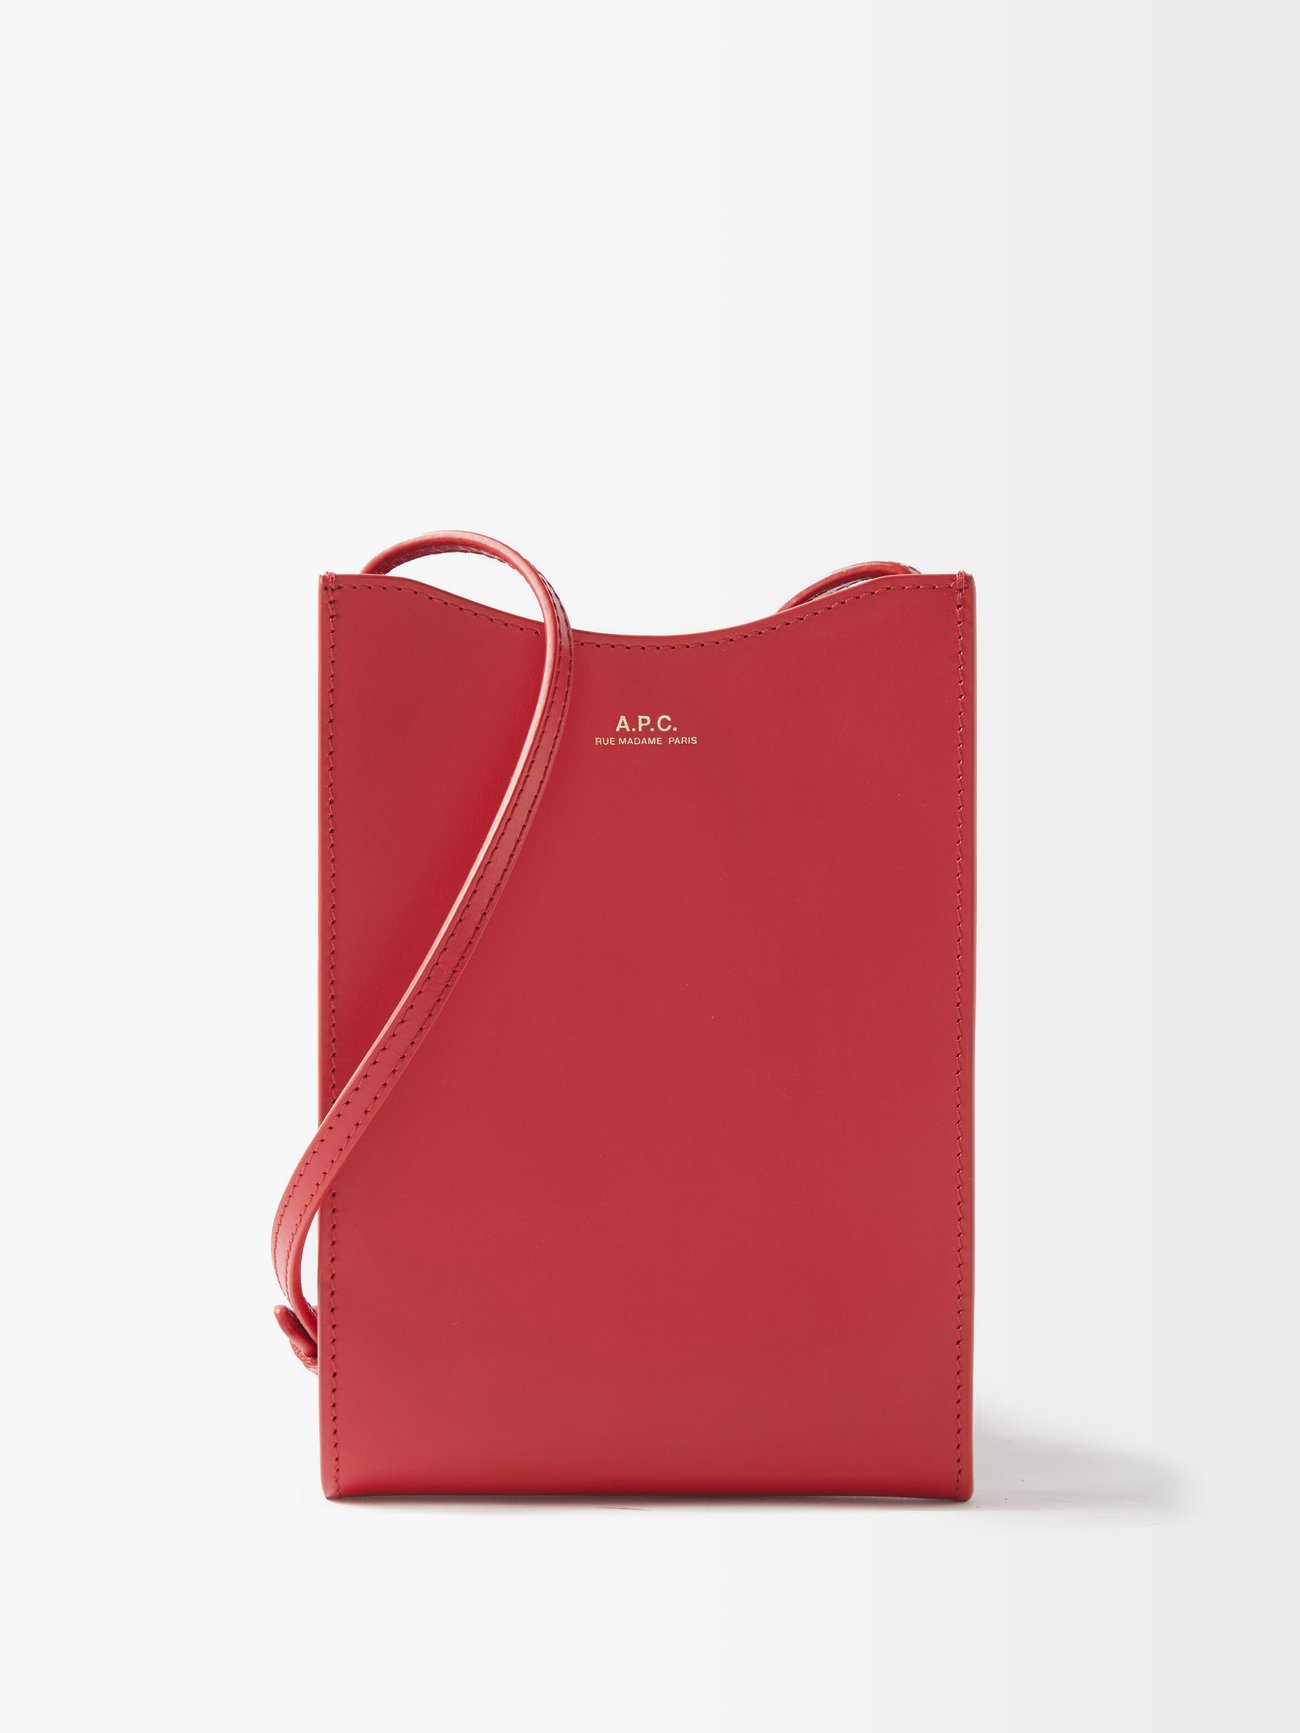 A.P.C. アー ペー セー ジェイミー レザークロスボディバッグ RED 